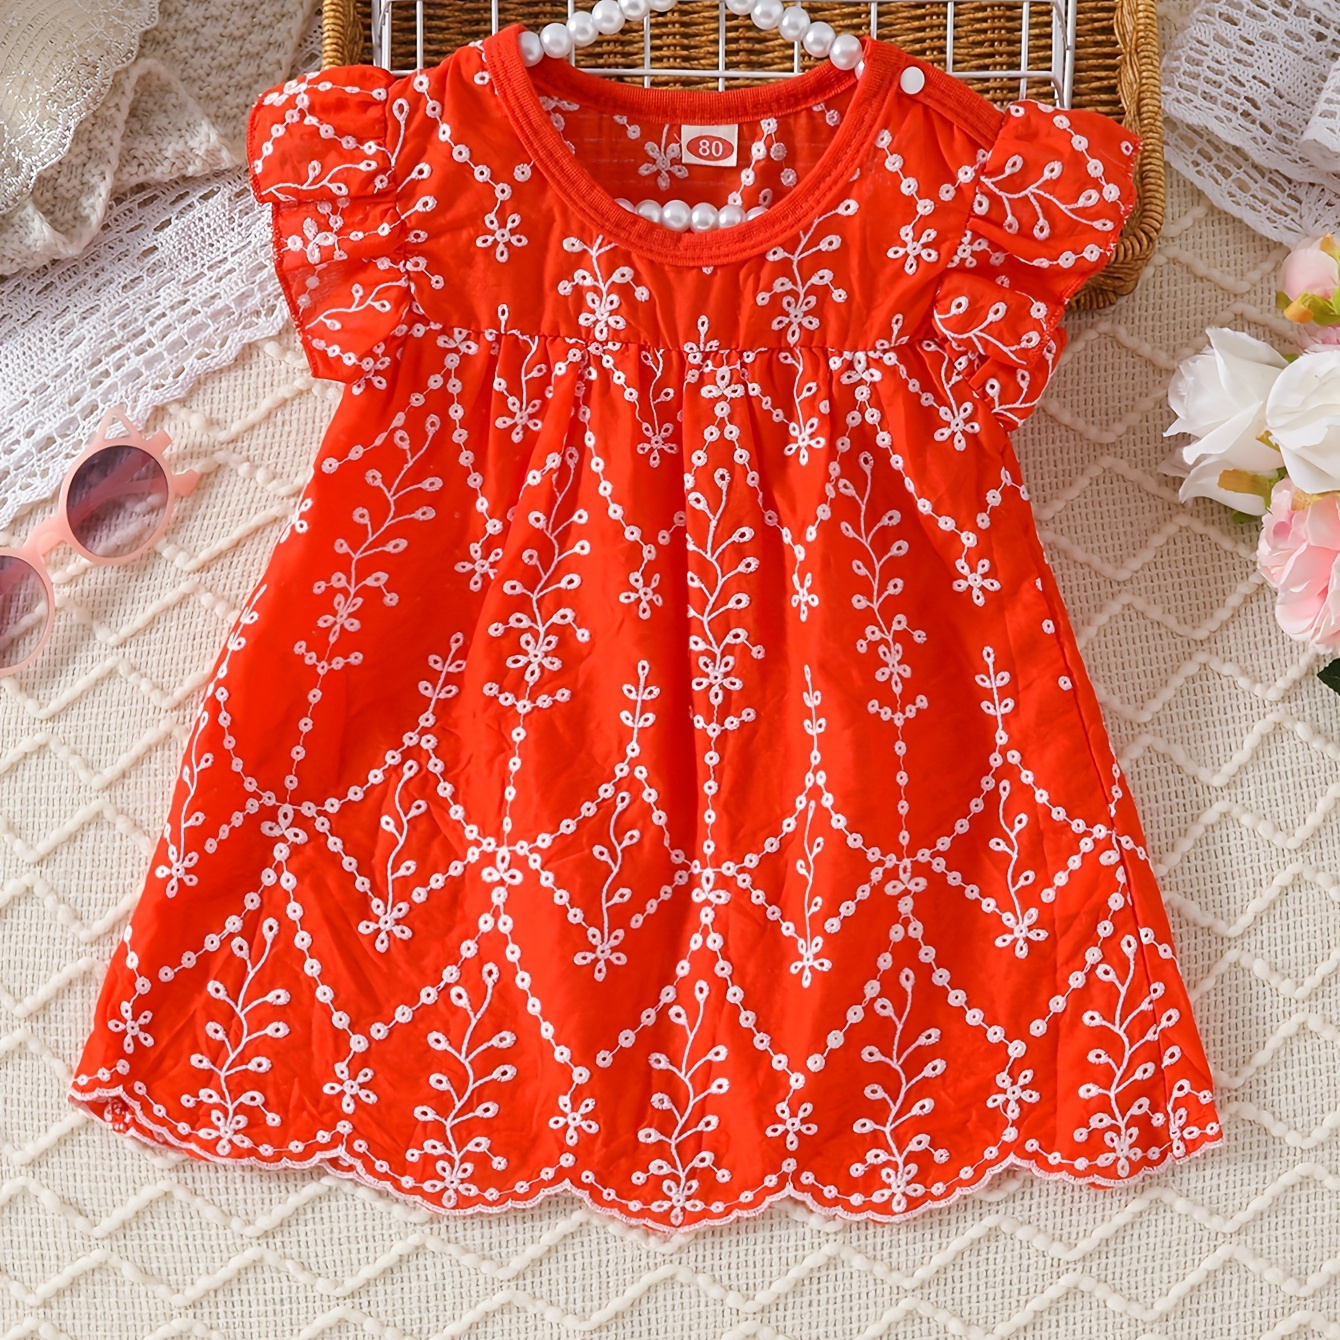 

Baby's Boho Style Flower Embroidered Dress, Casual Cap Sleeve Dress, Infant & Toddler Girl's Clothing For Summer/spring, As Gift